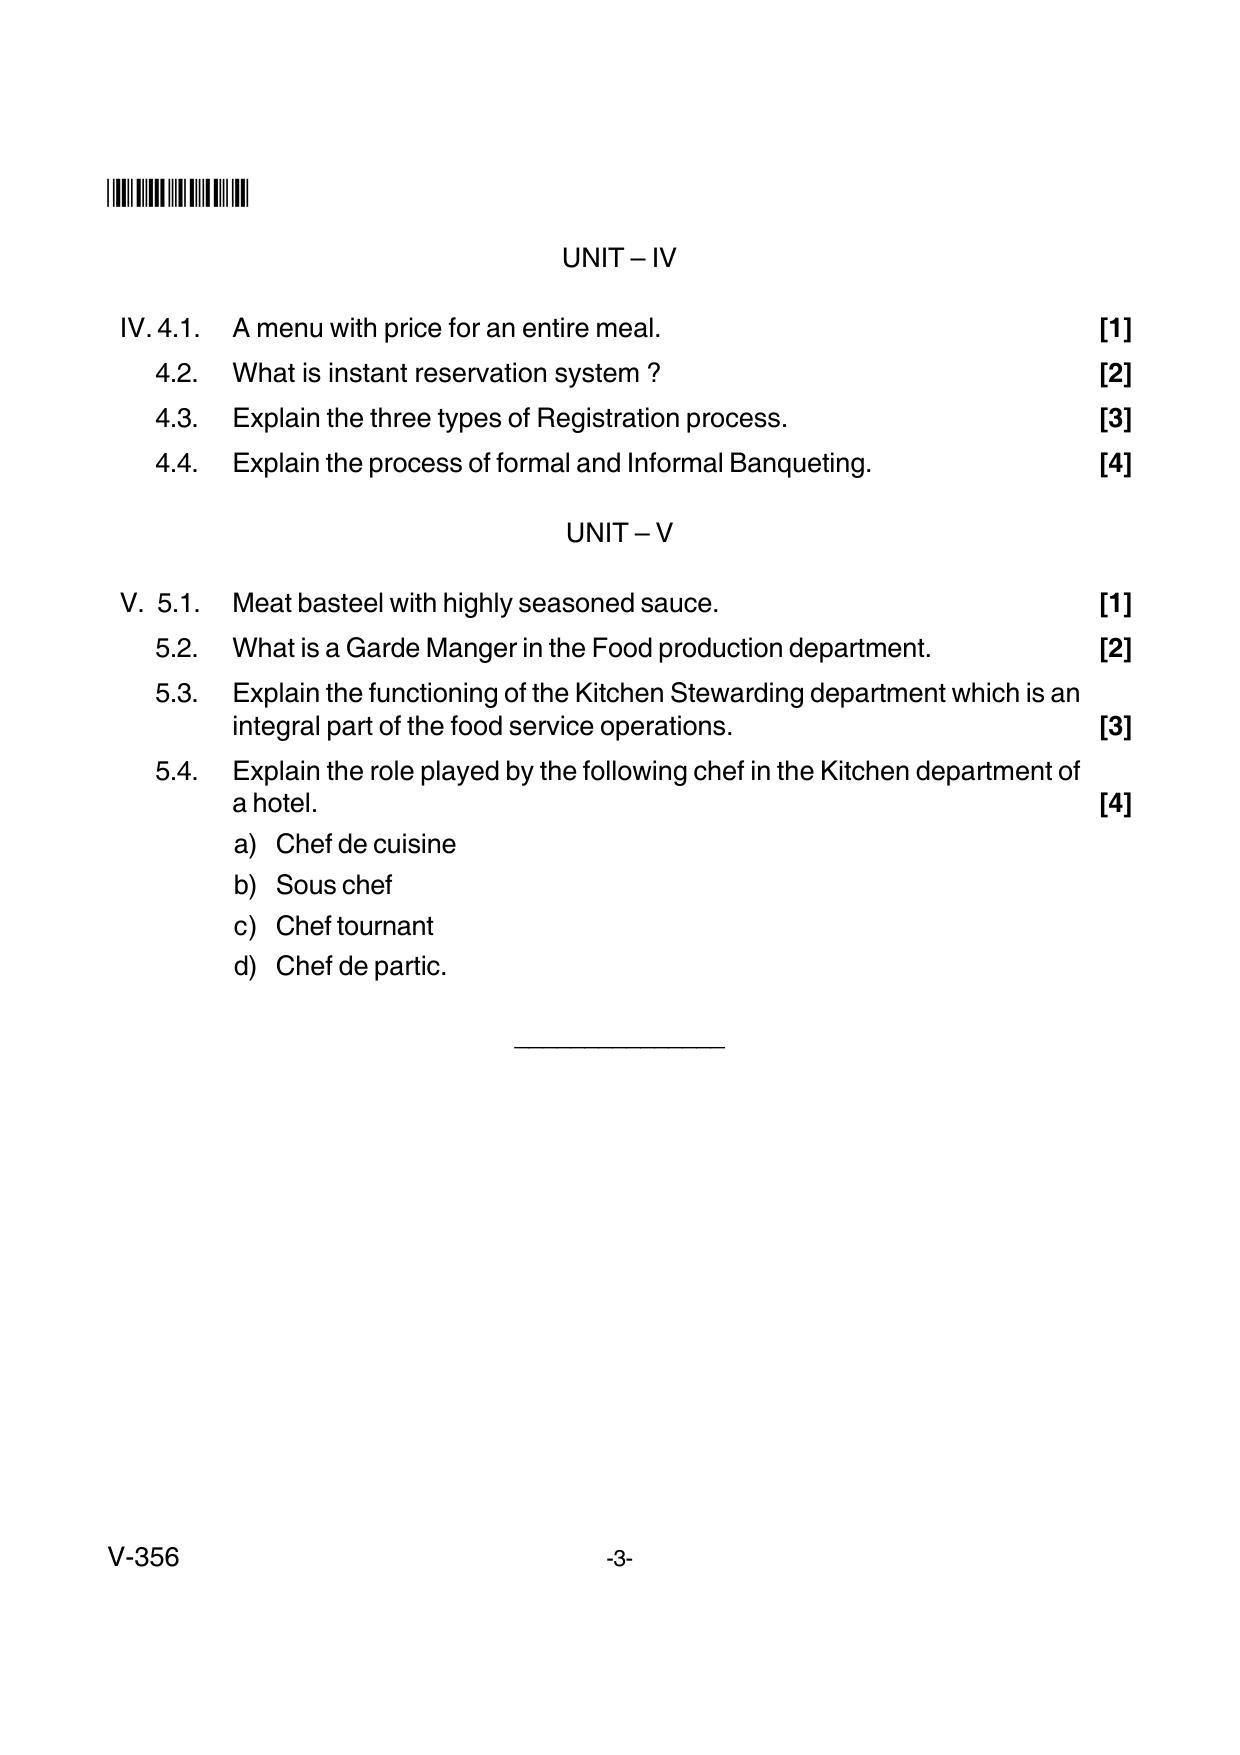 Goa Board Class 12 Introduction to Hospitality Industry  Voc 356 New Syllabus (June 2018) Question Paper - Page 3